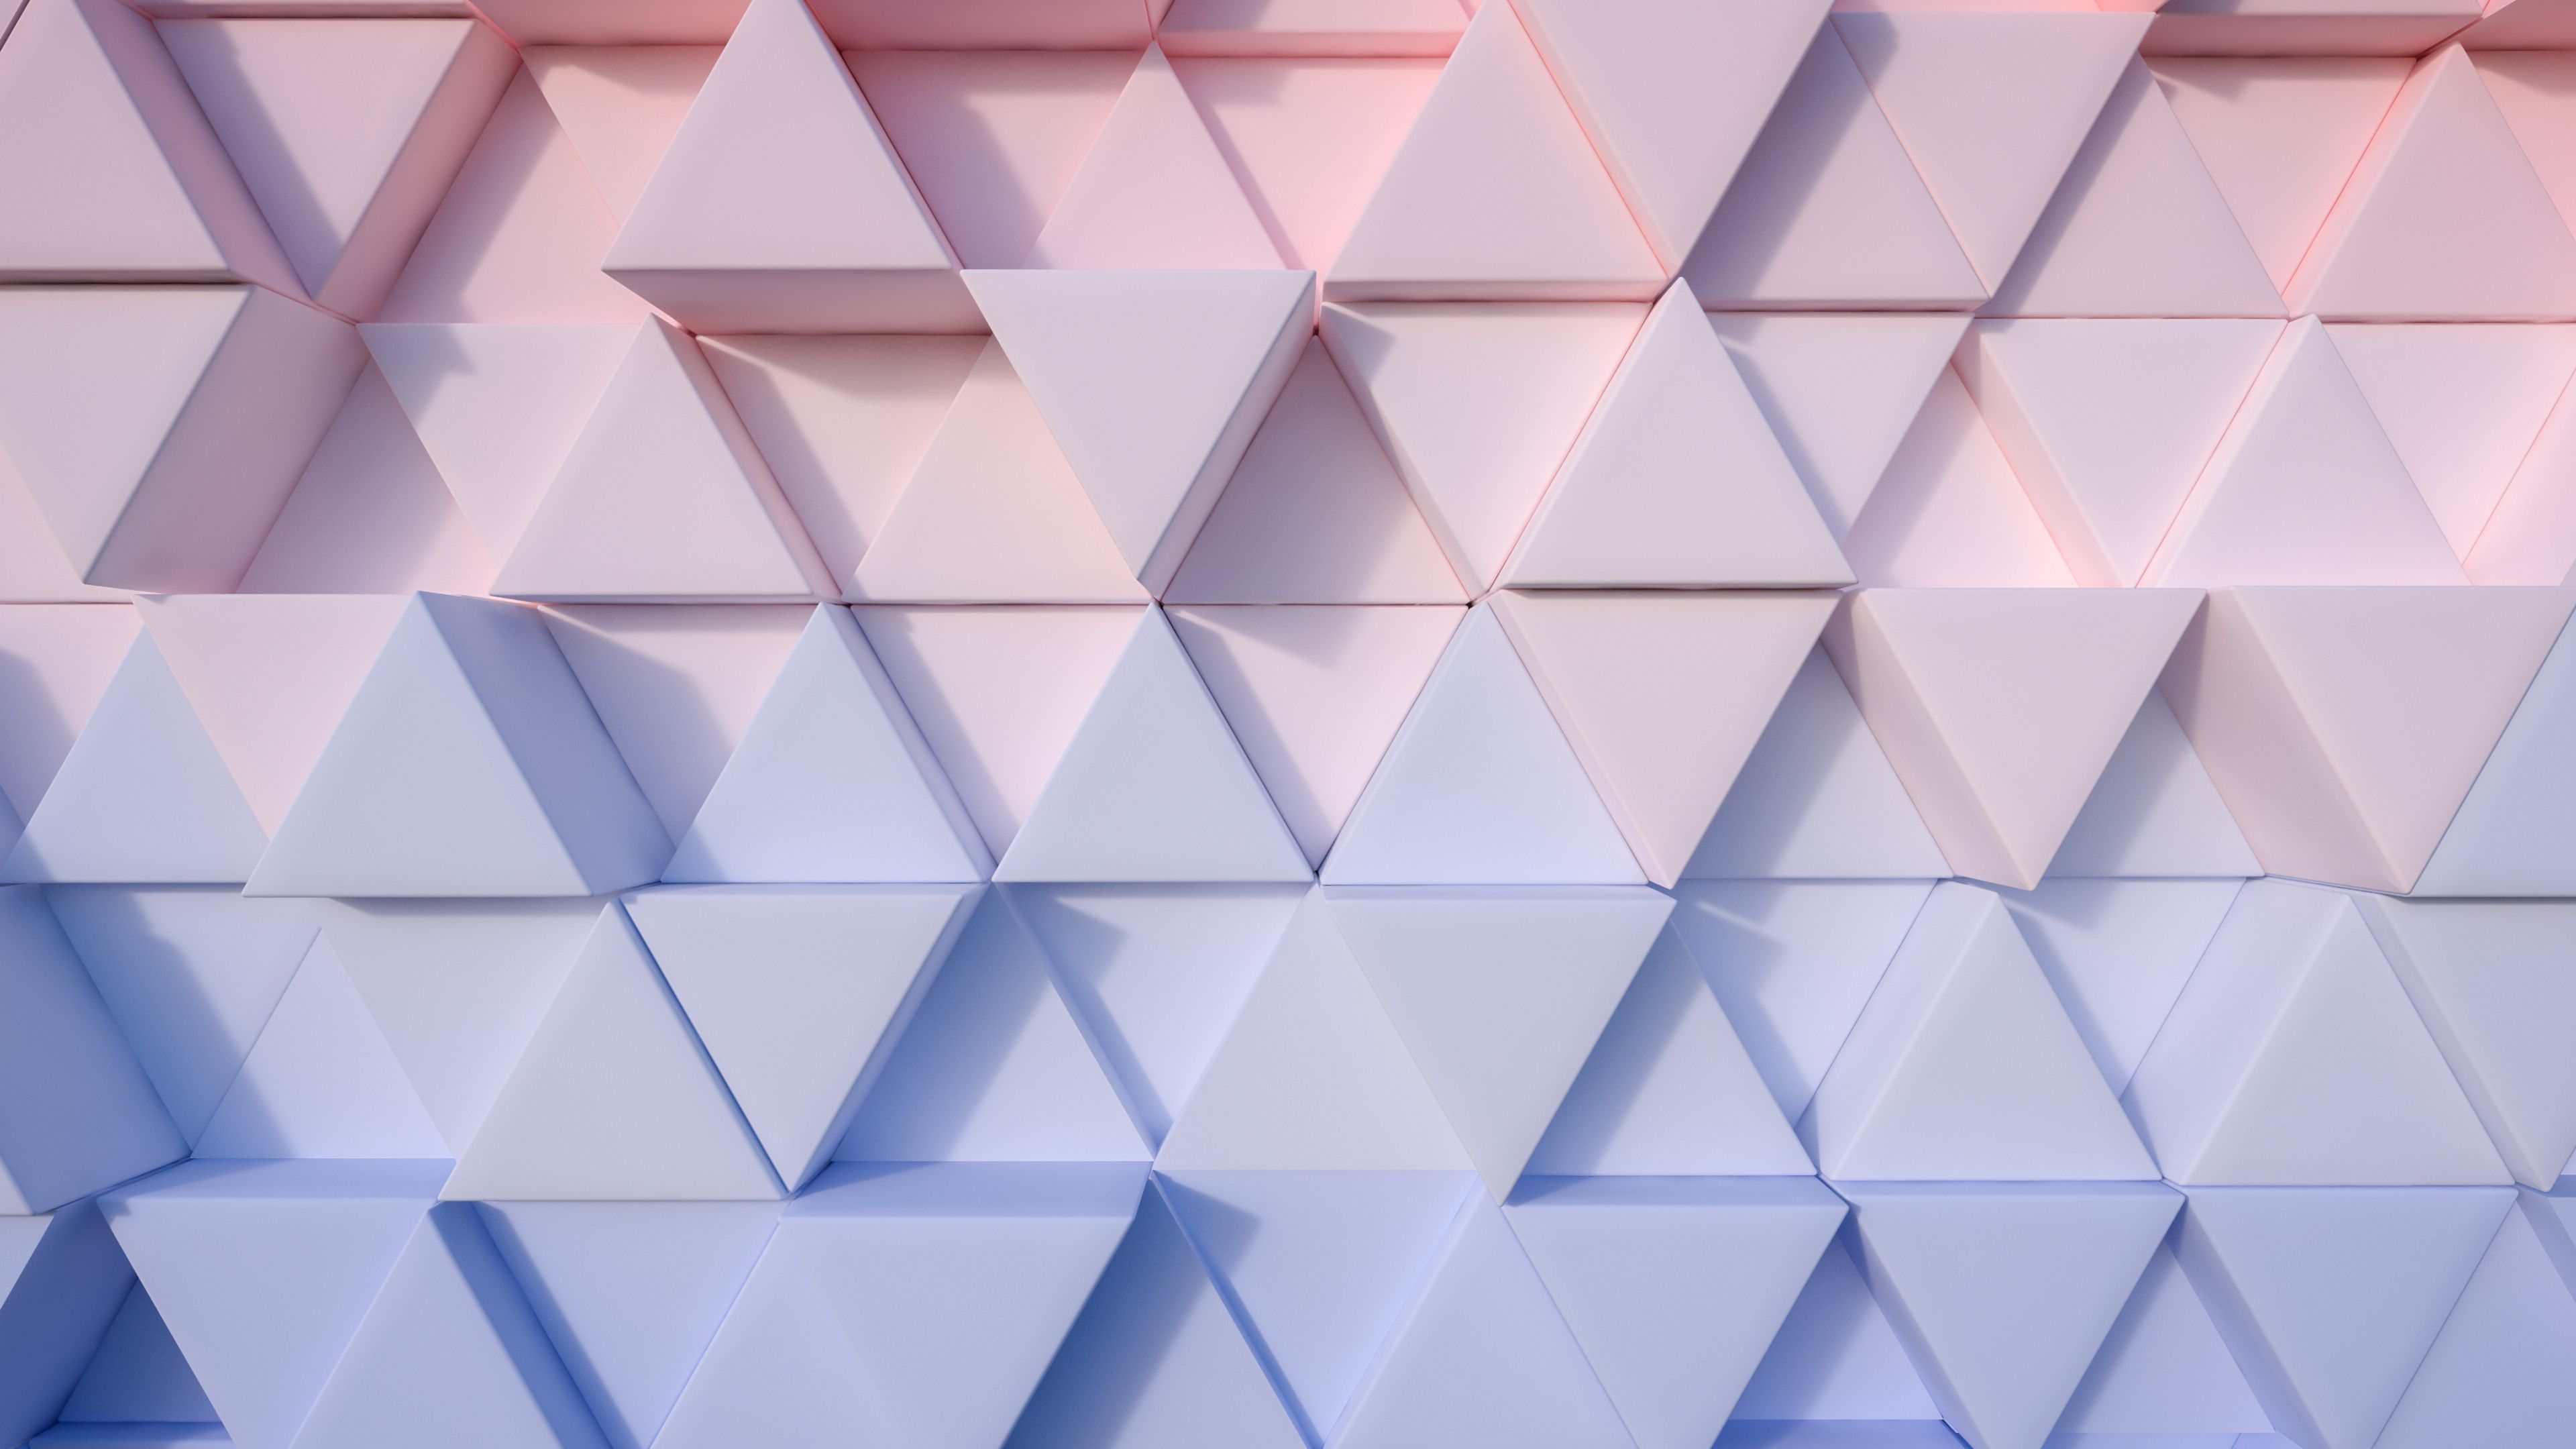 Download 3840x2160 wallpaper triangles, abstract, geometrical shape, 4k, uhd 16: widescreen, 3840x2160 HD image, background, 2531